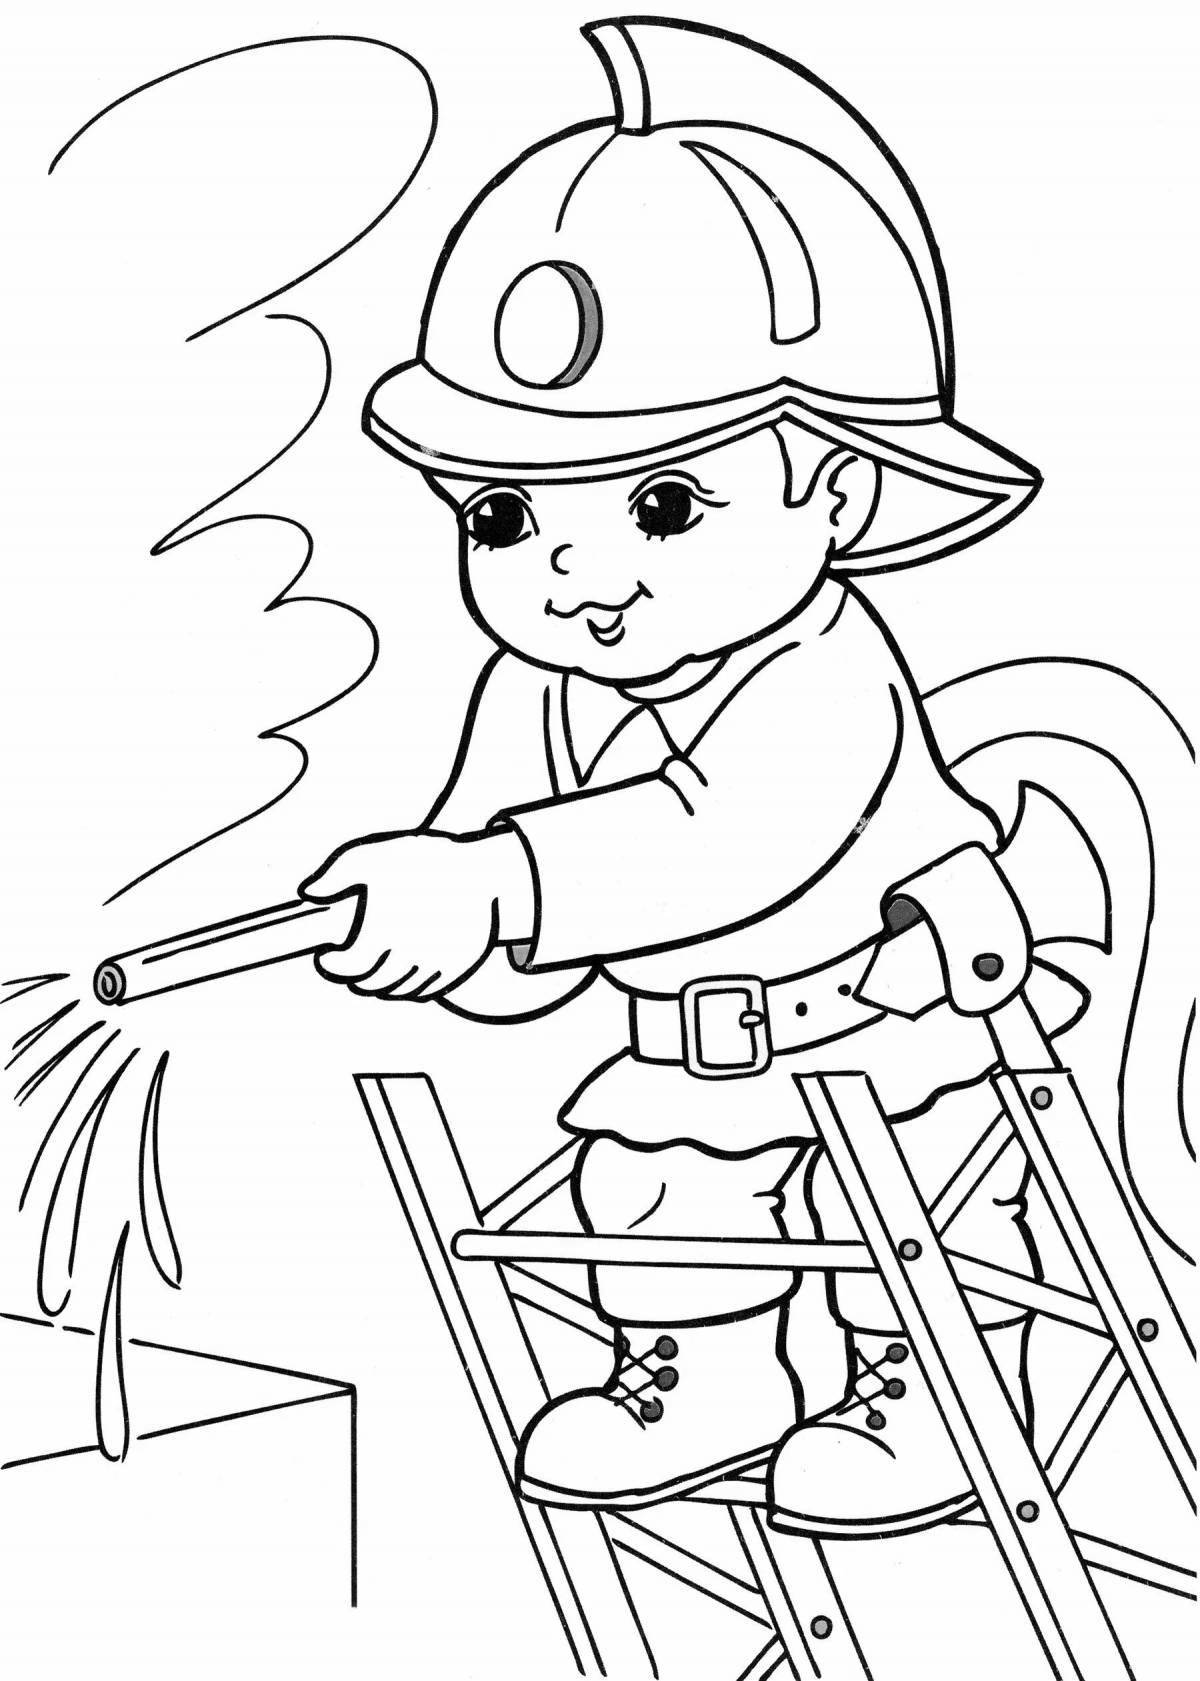 Exciting firefighter coloring book for kids